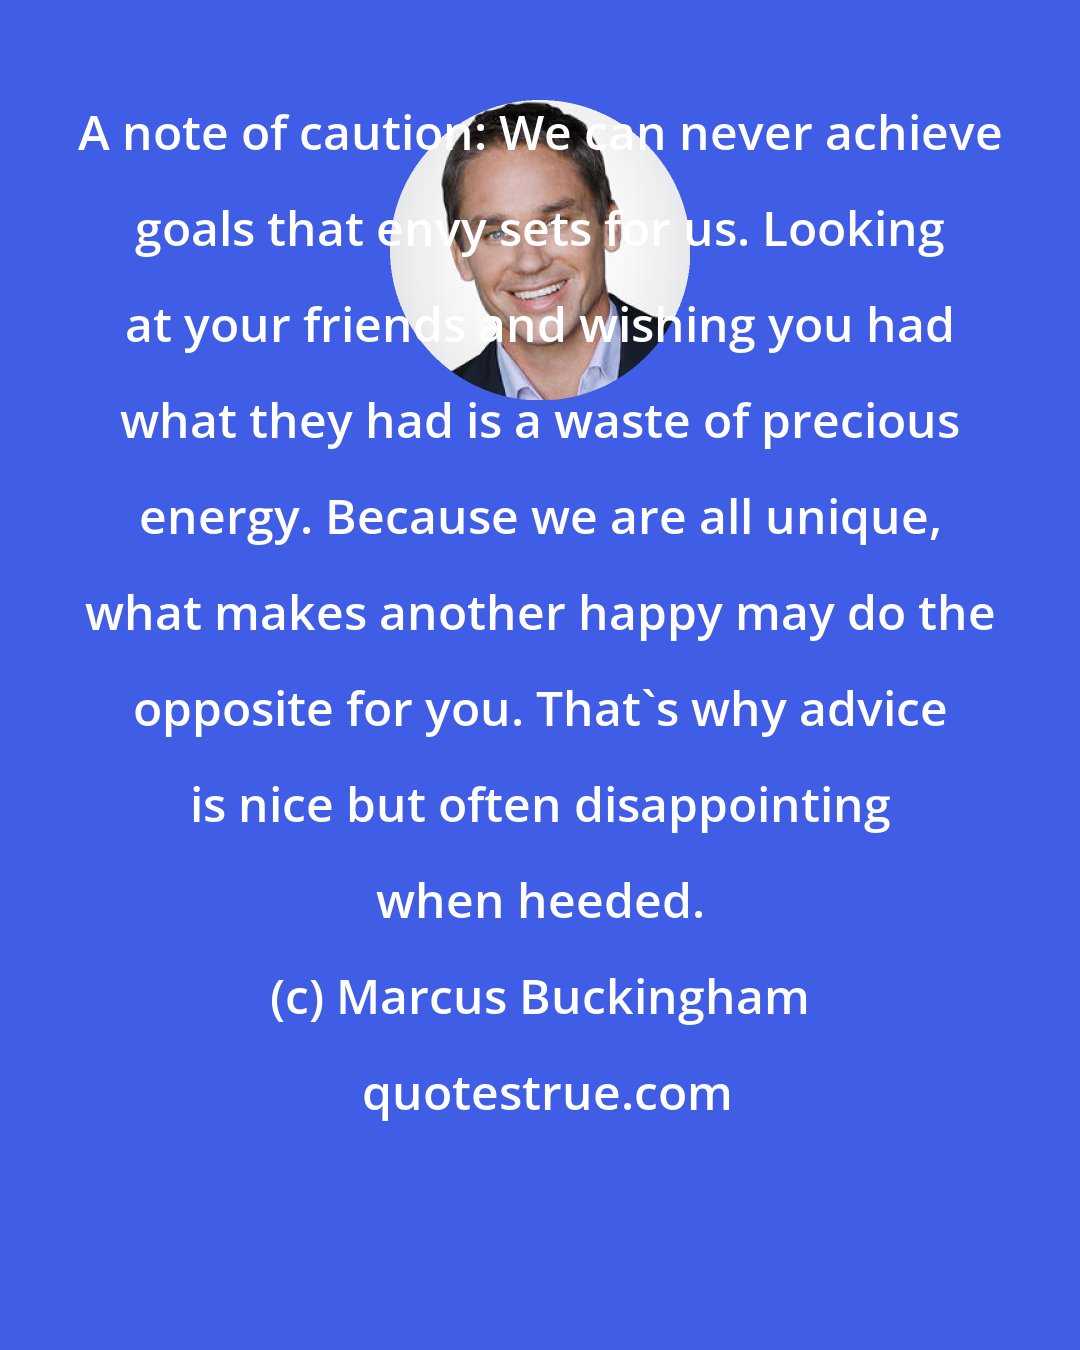 Marcus Buckingham: A note of caution: We can never achieve goals that envy sets for us. Looking at your friends and wishing you had what they had is a waste of precious energy. Because we are all unique, what makes another happy may do the opposite for you. That's why advice is nice but often disappointing when heeded.